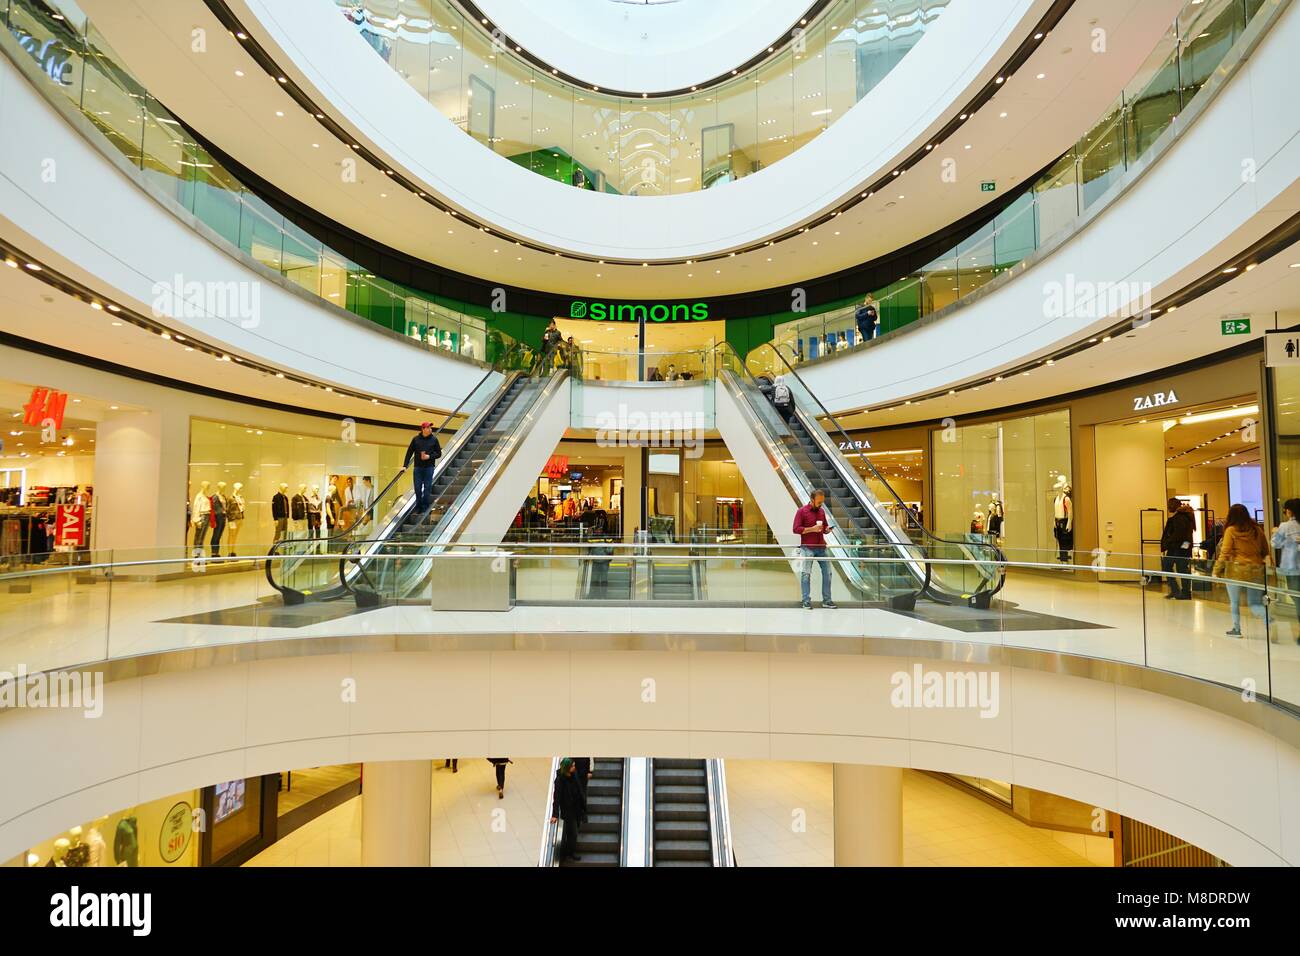 View of the Rideau Centre, a large commercial shopping center mall in ...